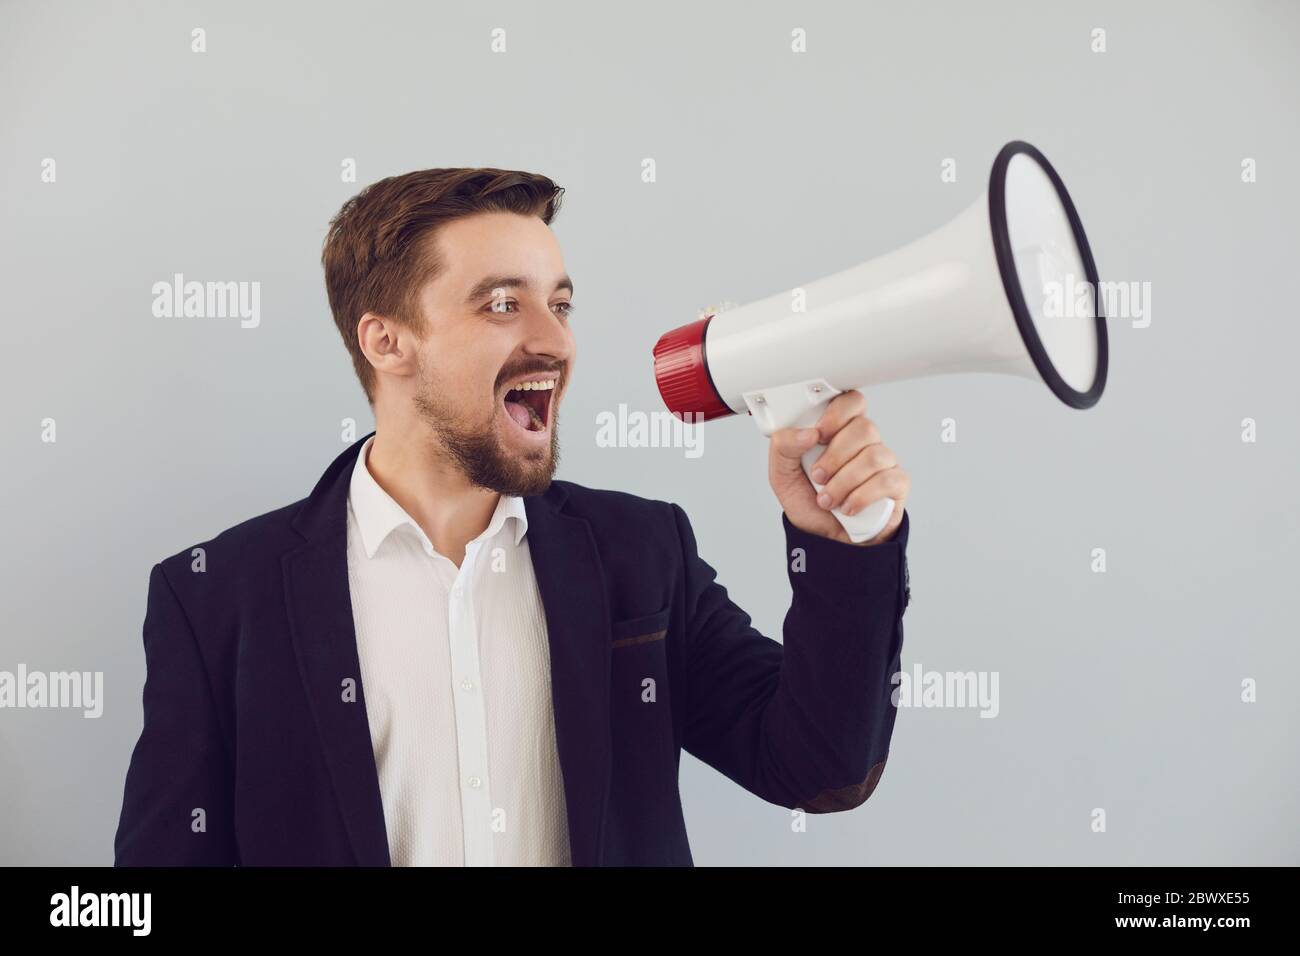 A man in a jacket shouts in a bullhorn on a gray background. Stock Photo